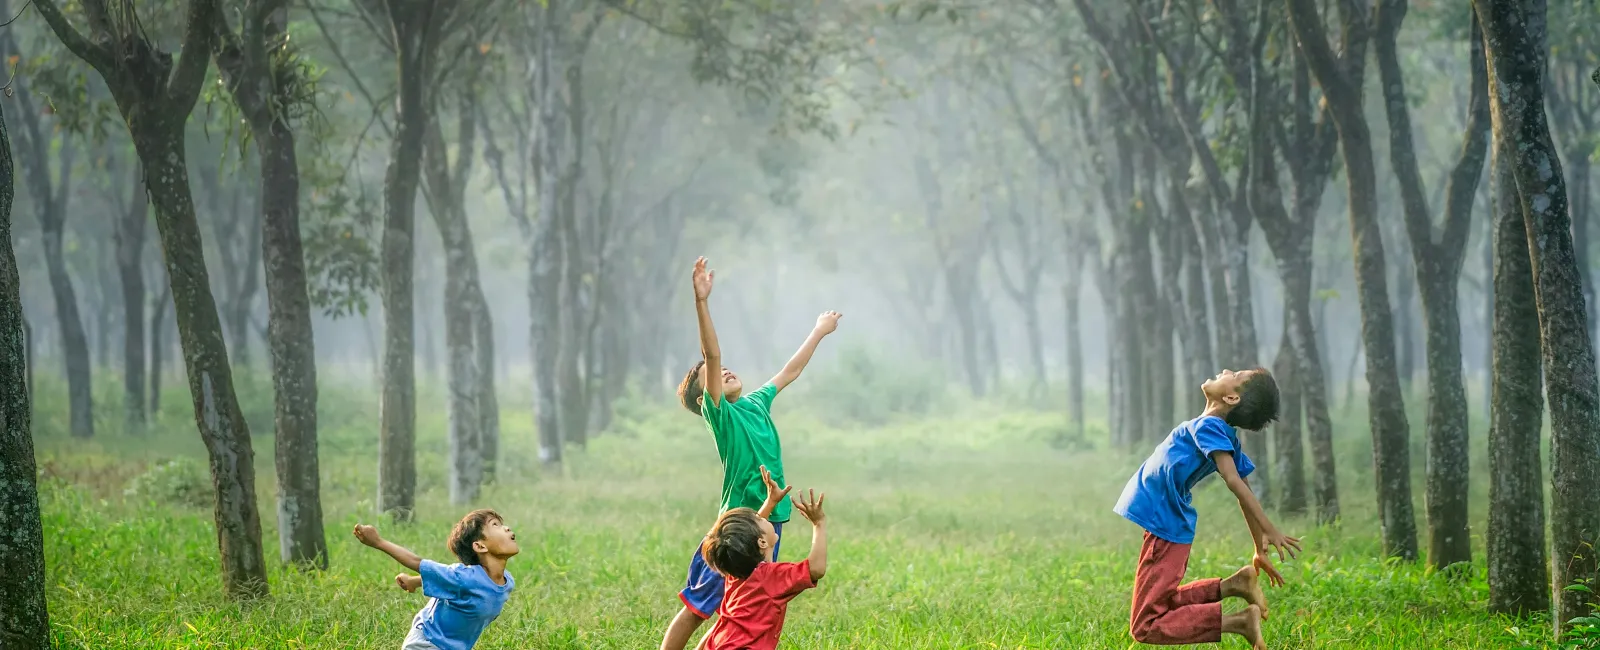 a group of kids playing with a ball in a grassy field